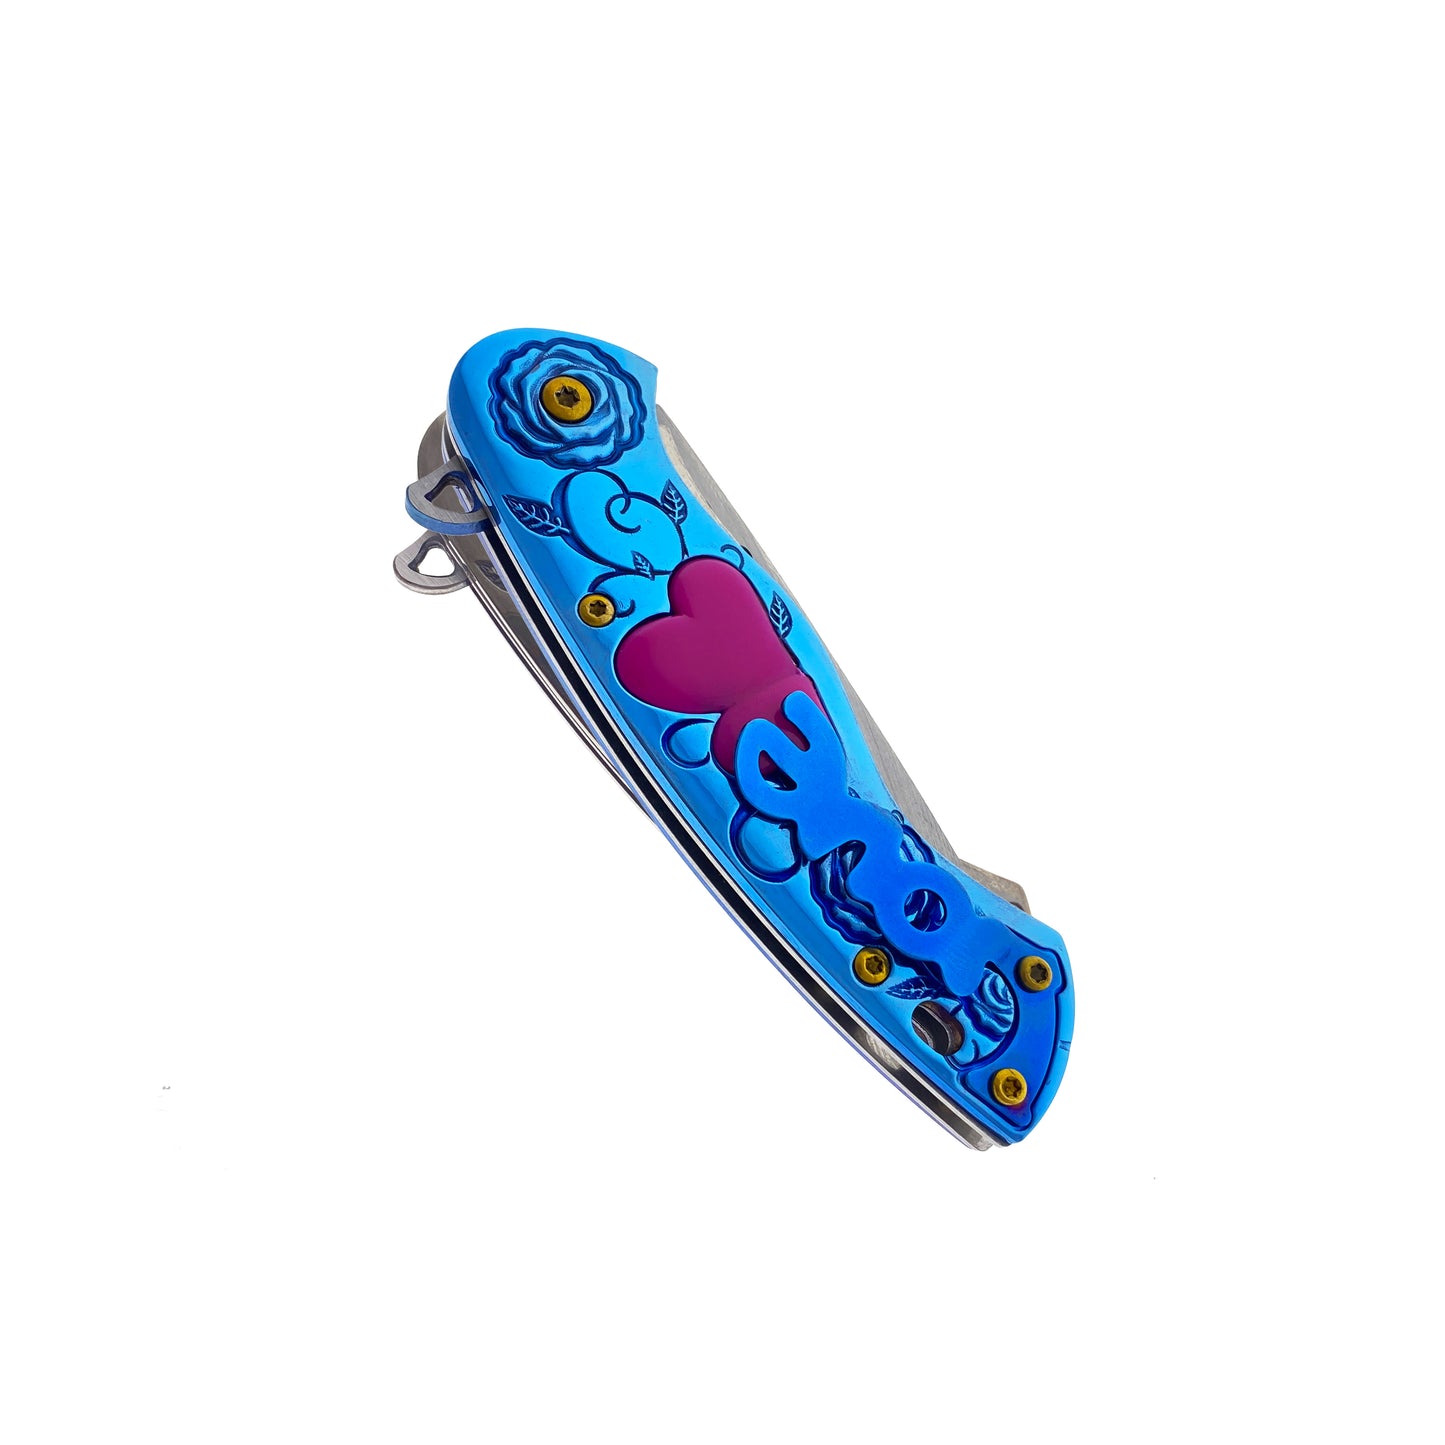 Falcon 7" Overall in Length Blue Handle w/ Pink Heart